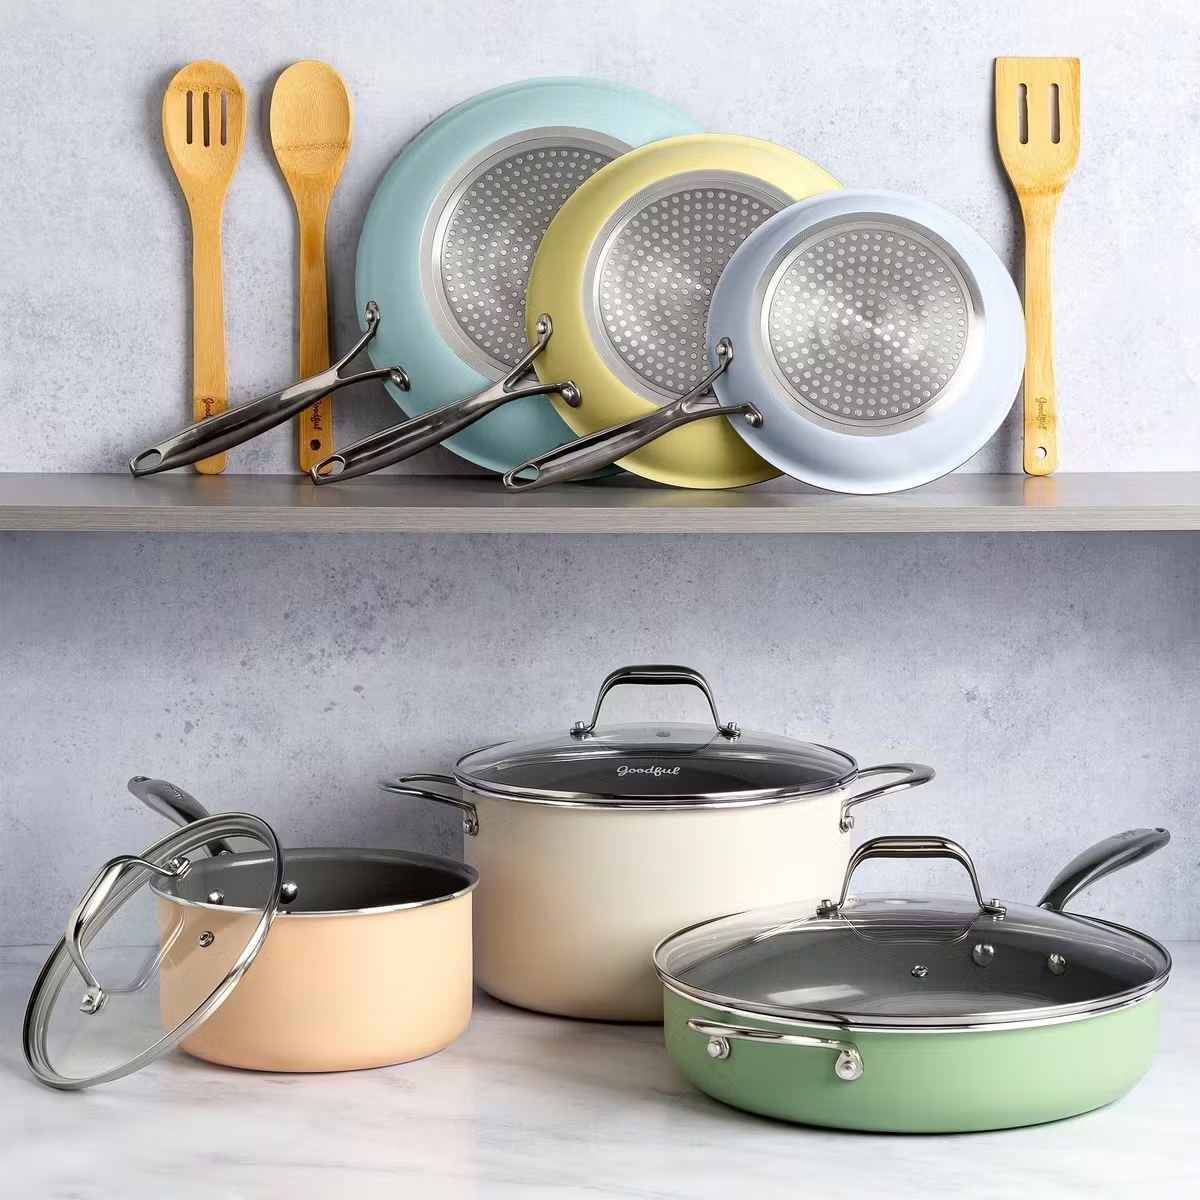 A set of pastel-colors pots and pan and utensils